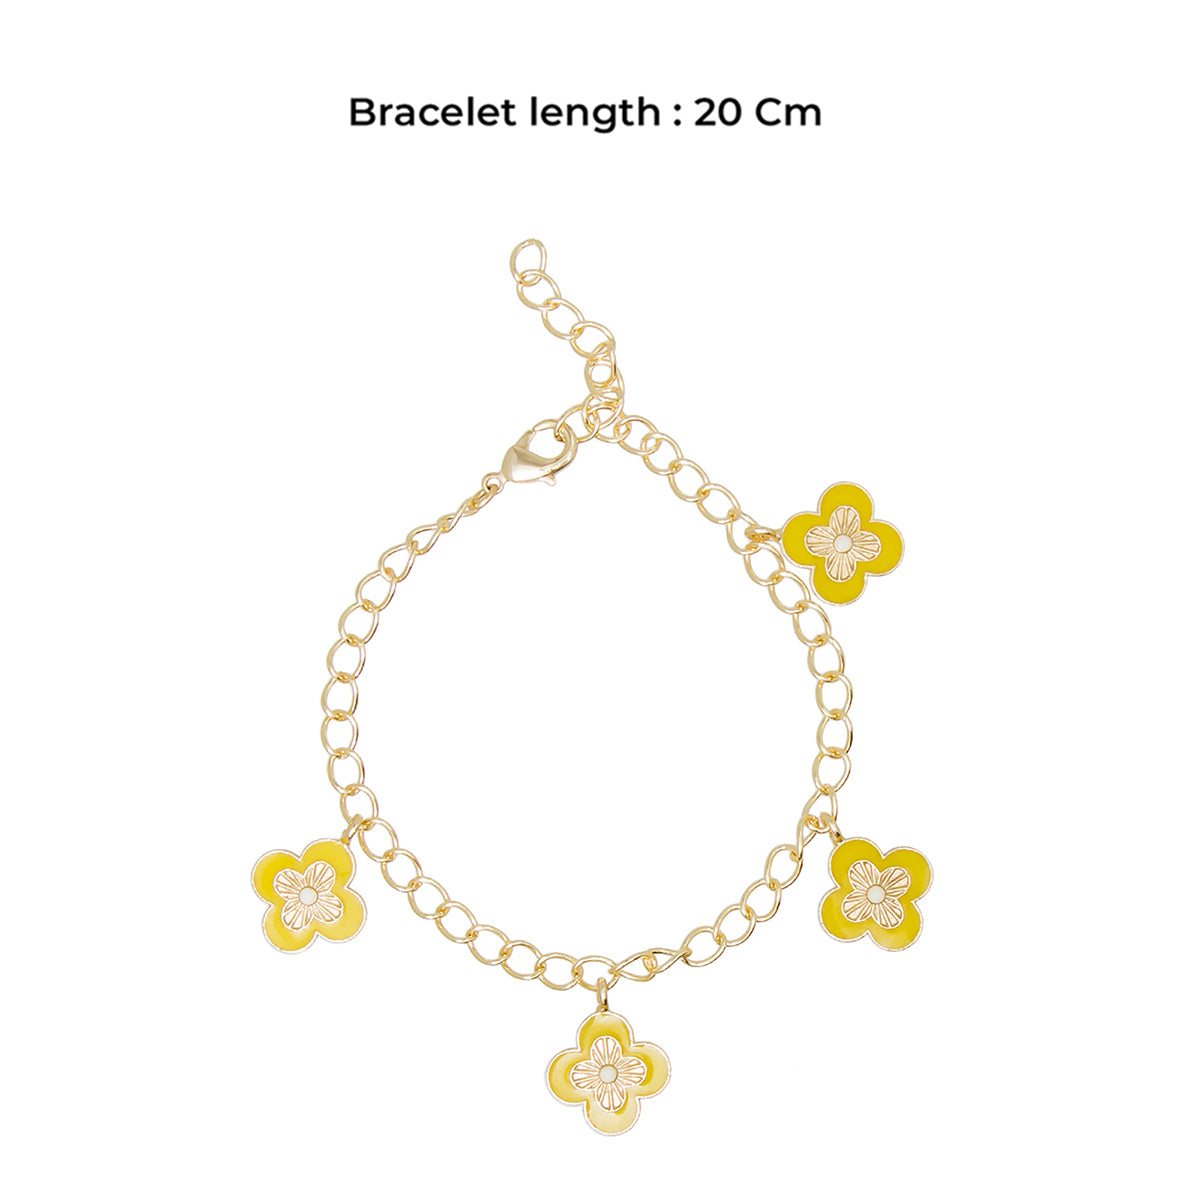 Cherished Moments Sterling Silver Lil Sis Bracelet with Flower Charm